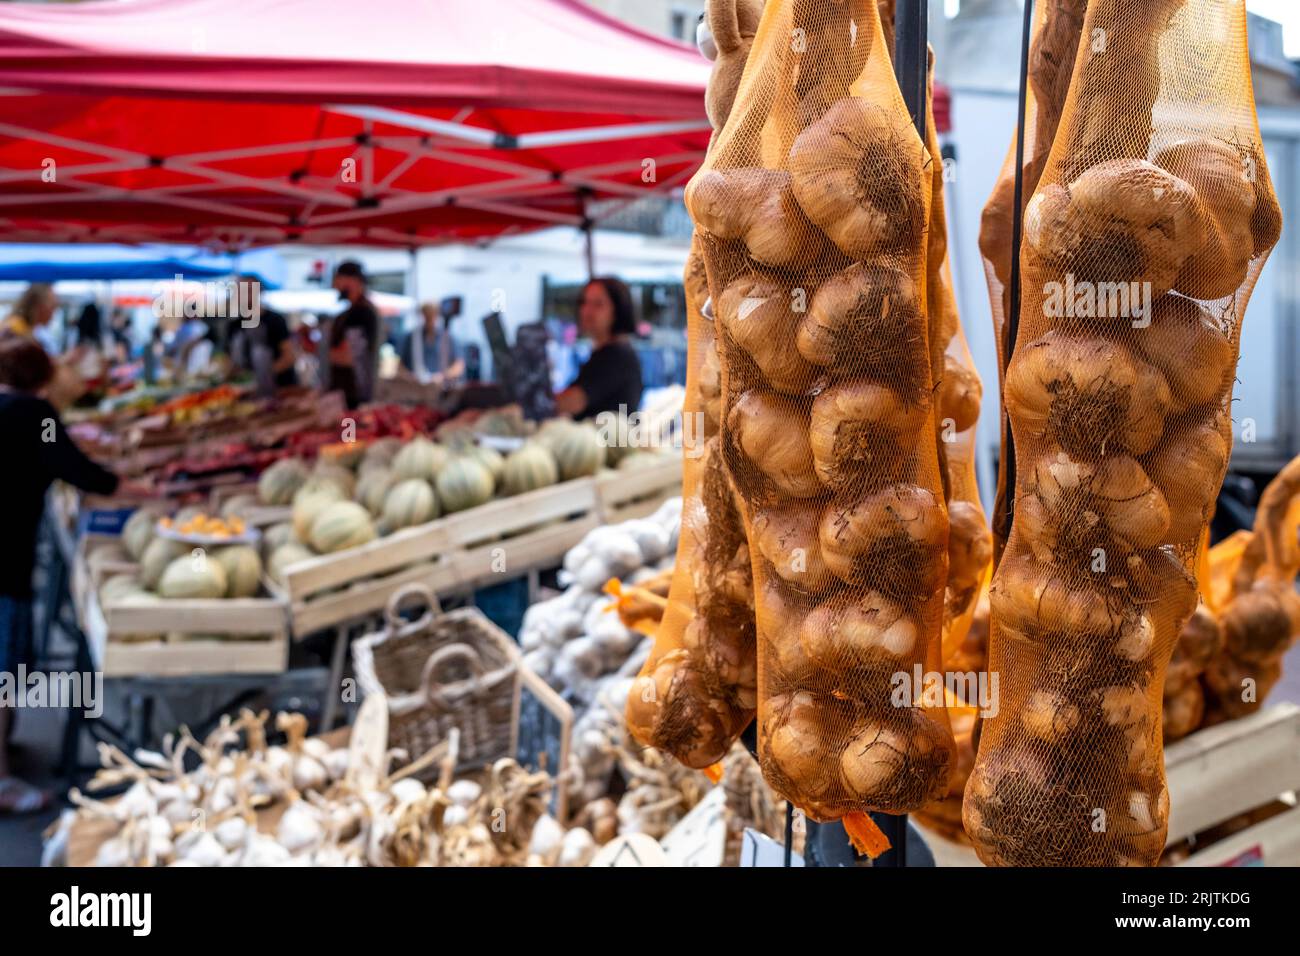 Fresh Garlic For Sale, At The Saturday Market In Dieppe, Seine-Maritime Department, France. Stock Photo